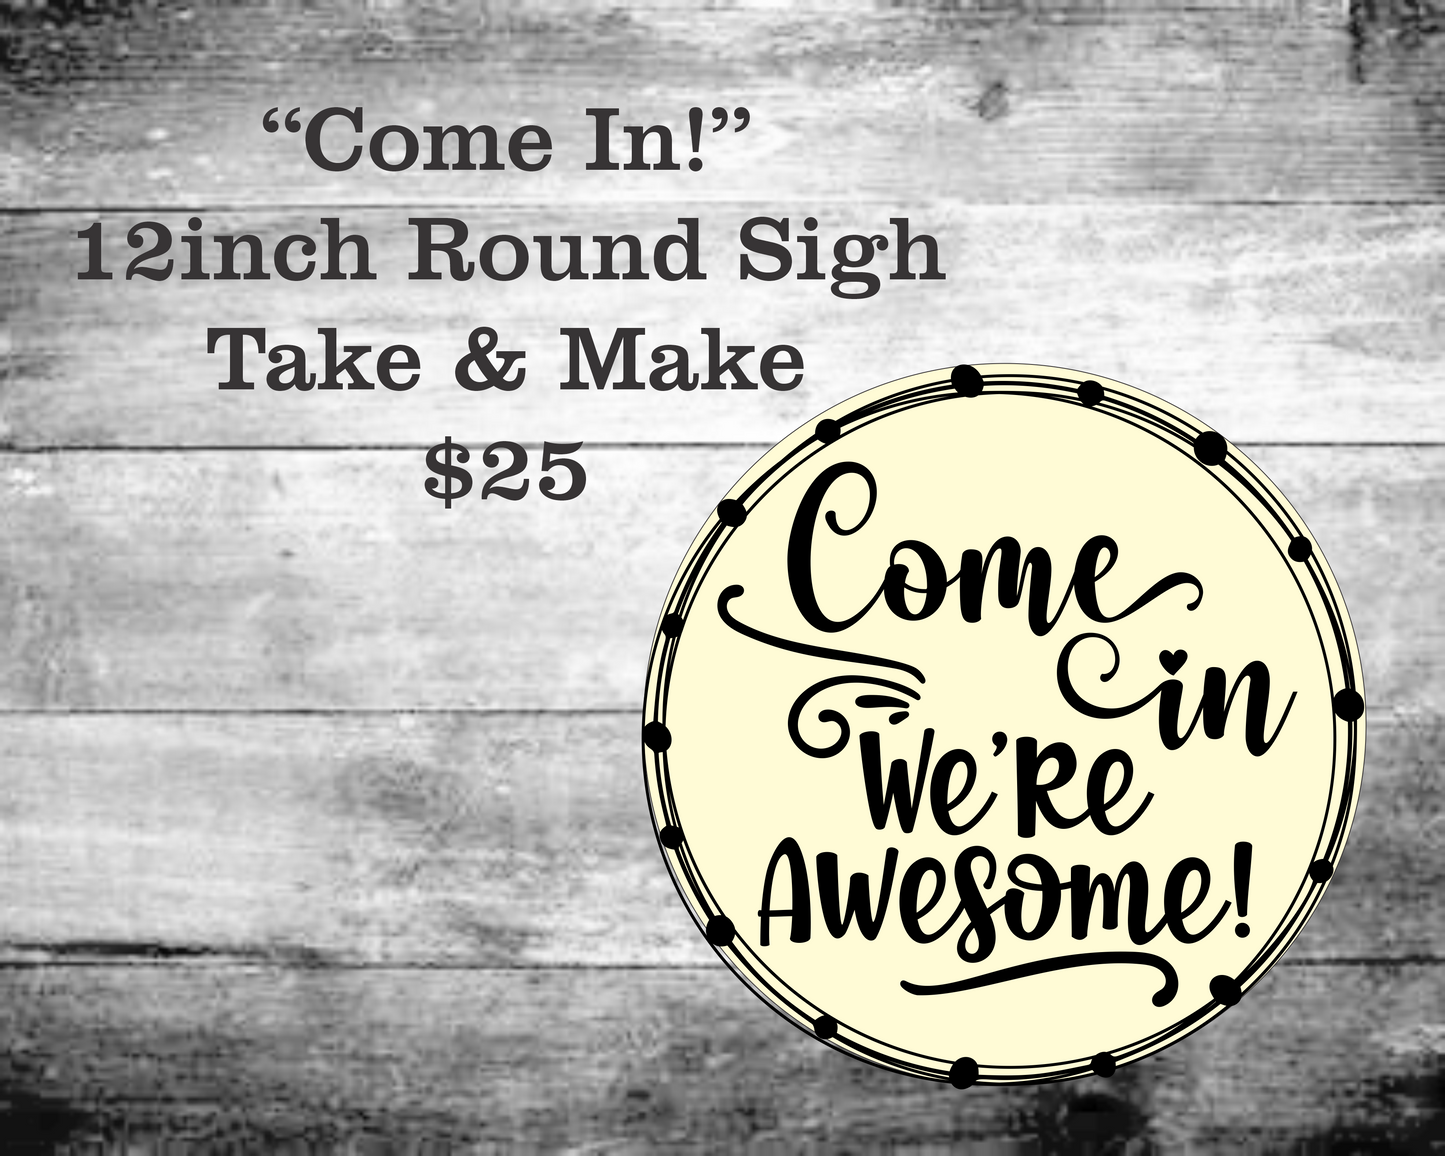 Come In, We're Awesome Round Sign Kit